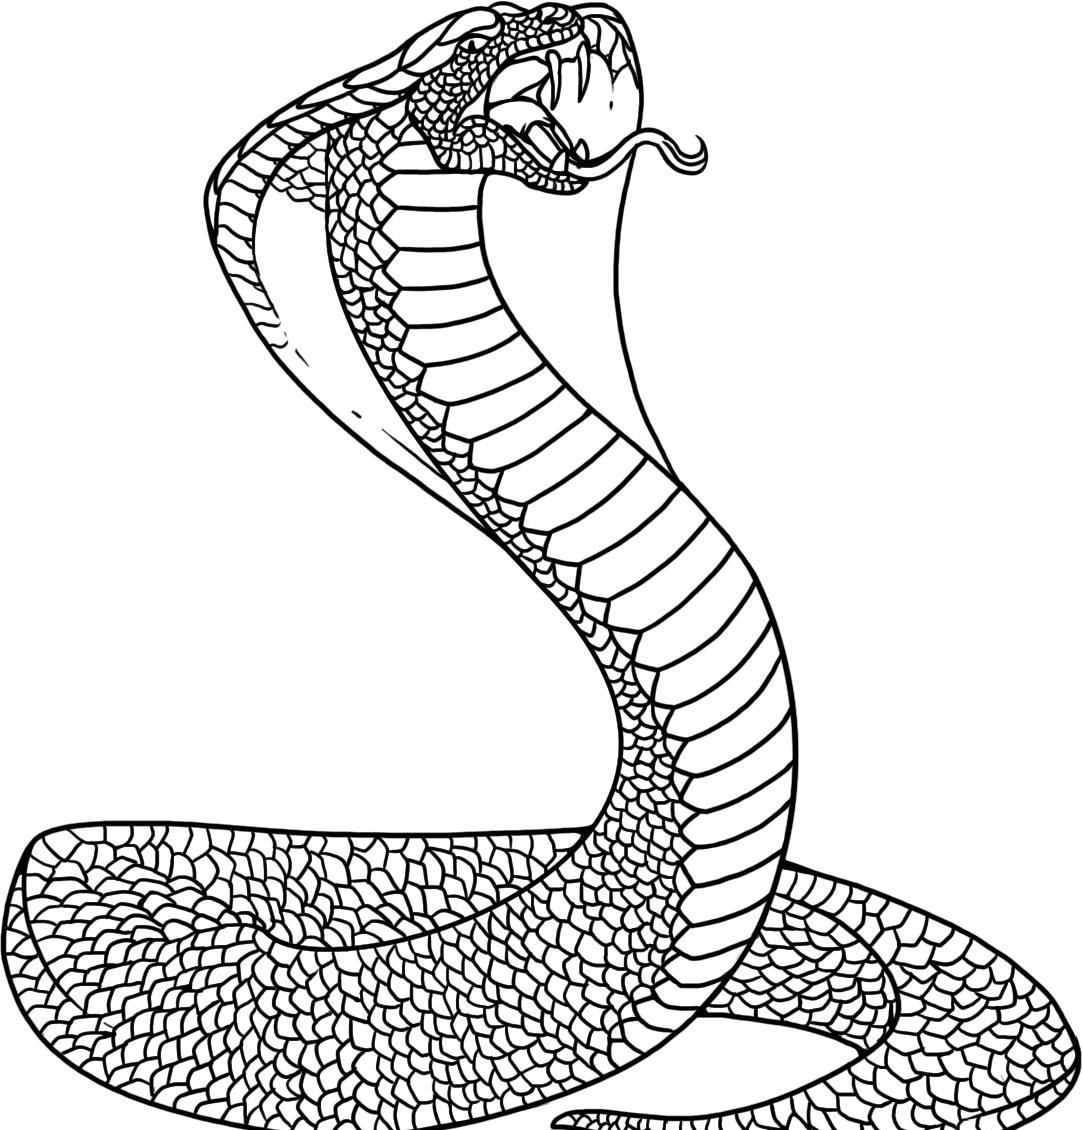 Free Printable Snake Coloring Pages For Kids | Animal Place